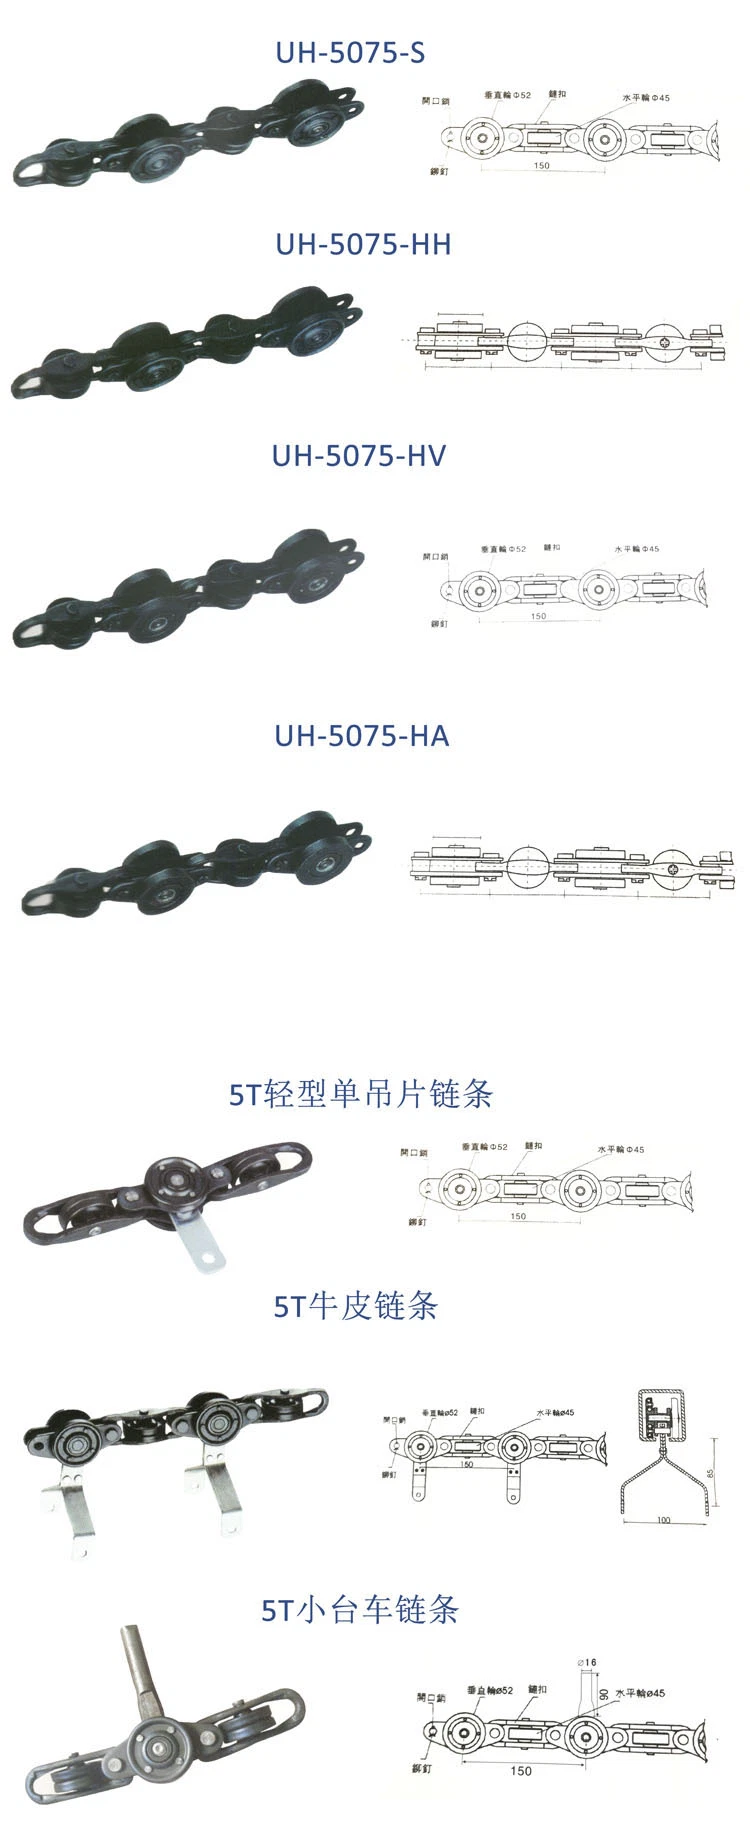 Quality-Assured Overhead Trolley Conveyor Painting Line Roof Uh-5075-Hv Heavy Flexible Conveyor Chain for Road Line Painting Machine